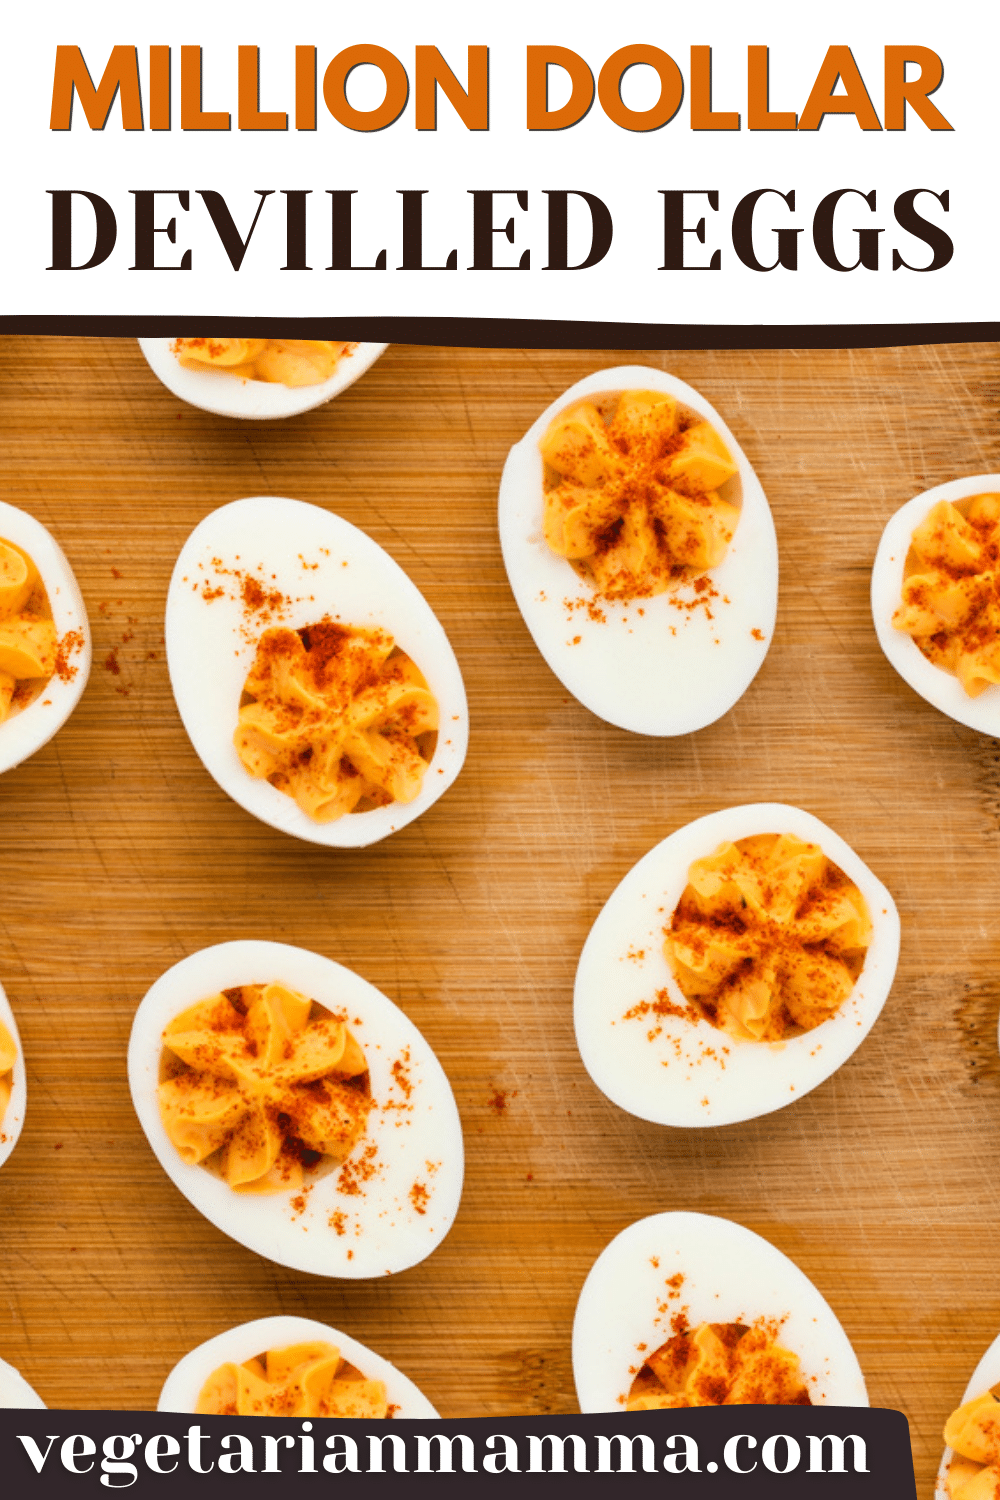 This easy recipe for Million Dollar Deviled Eggs is the real deal! When you bring a tray of these creamy, flavorful hard-boiled eggs to a party, they will prove to be worth their weight in precious metals- everyone loves them!